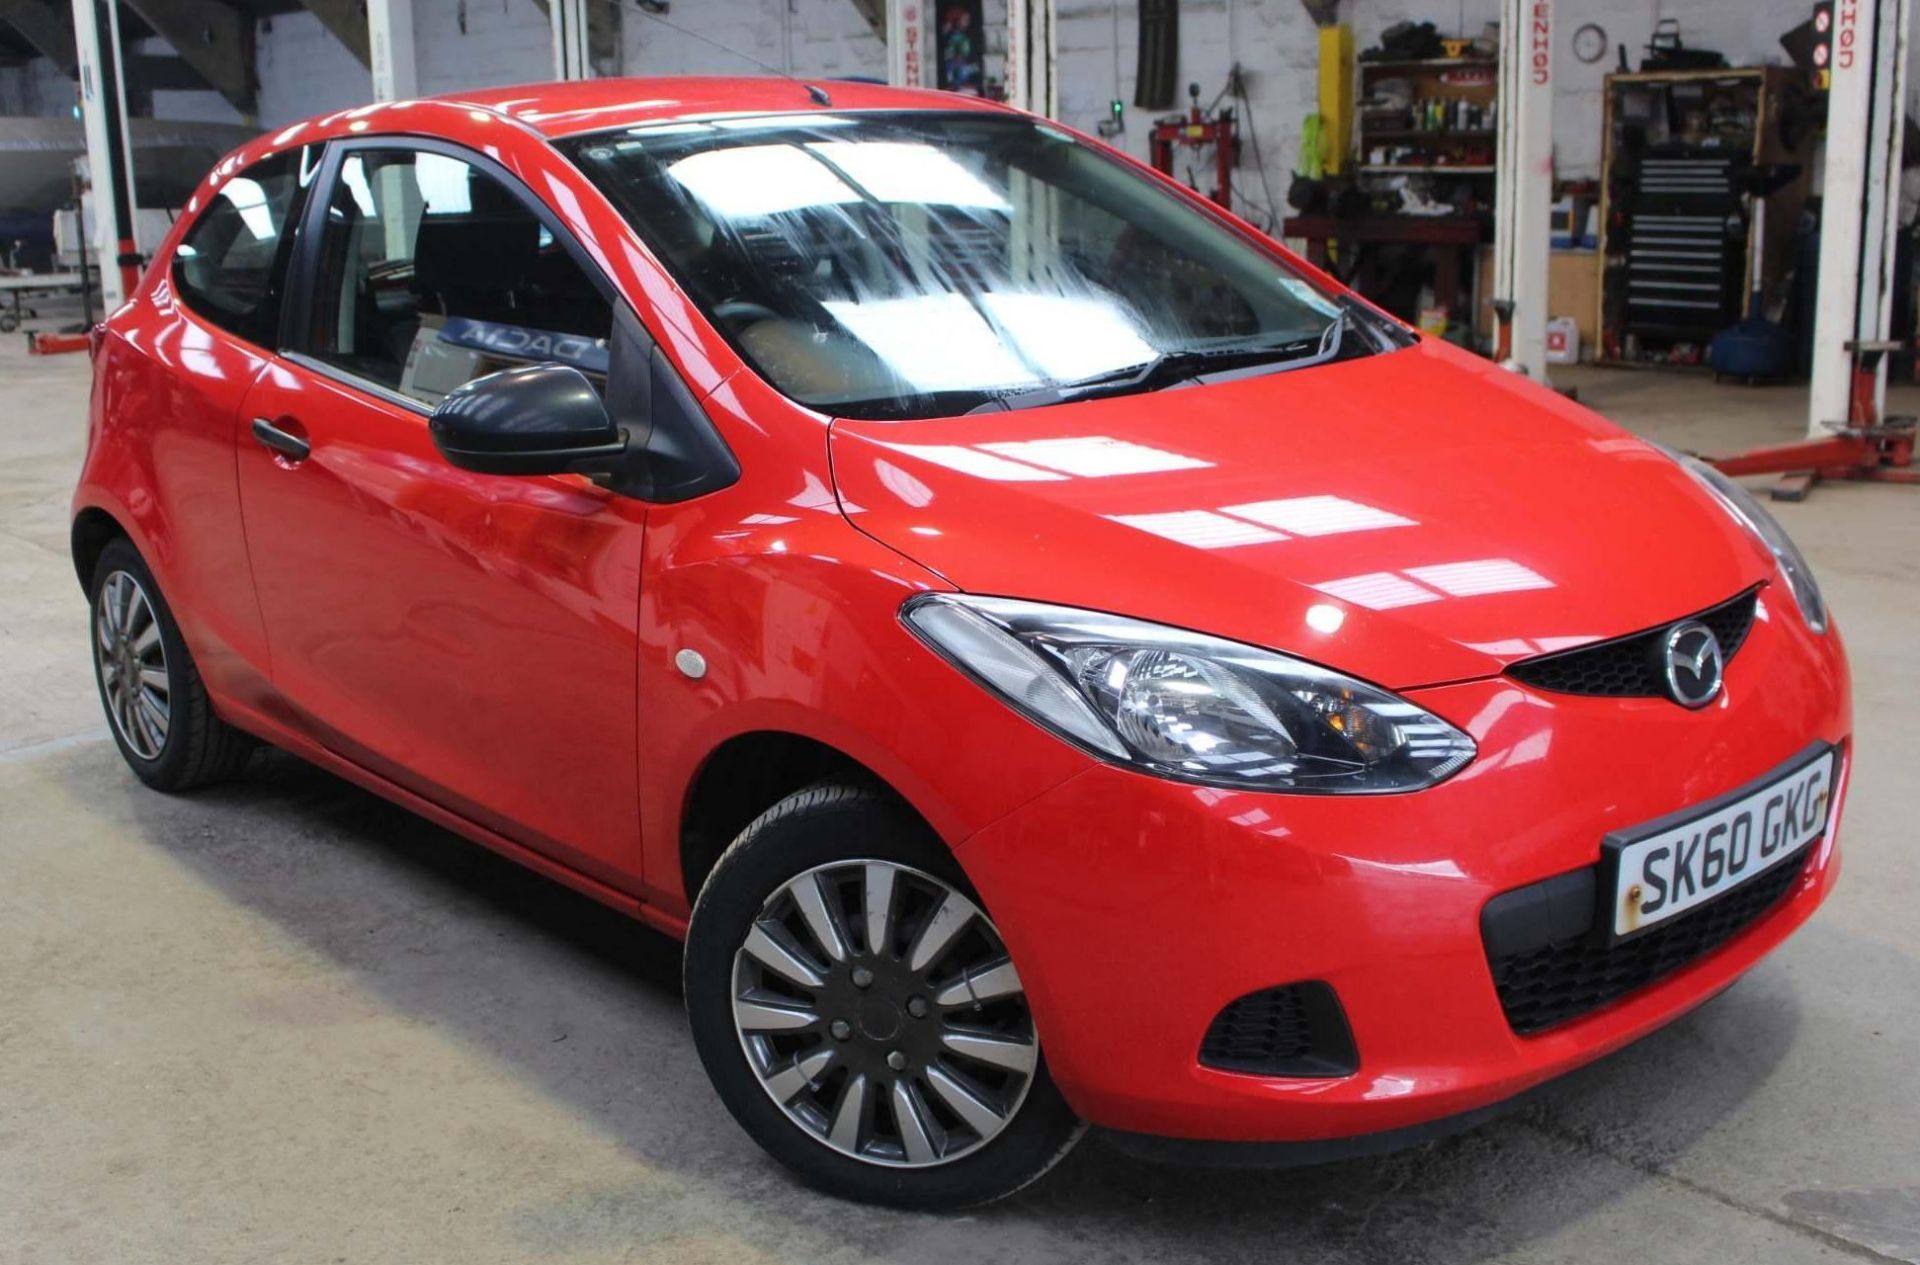 2010 Mazda2 1.3 TS 3Dr Hatchback - CL505 - NO VAT ON THE HAMMER - Location: Corby, Northamptonshire< - Image 2 of 17